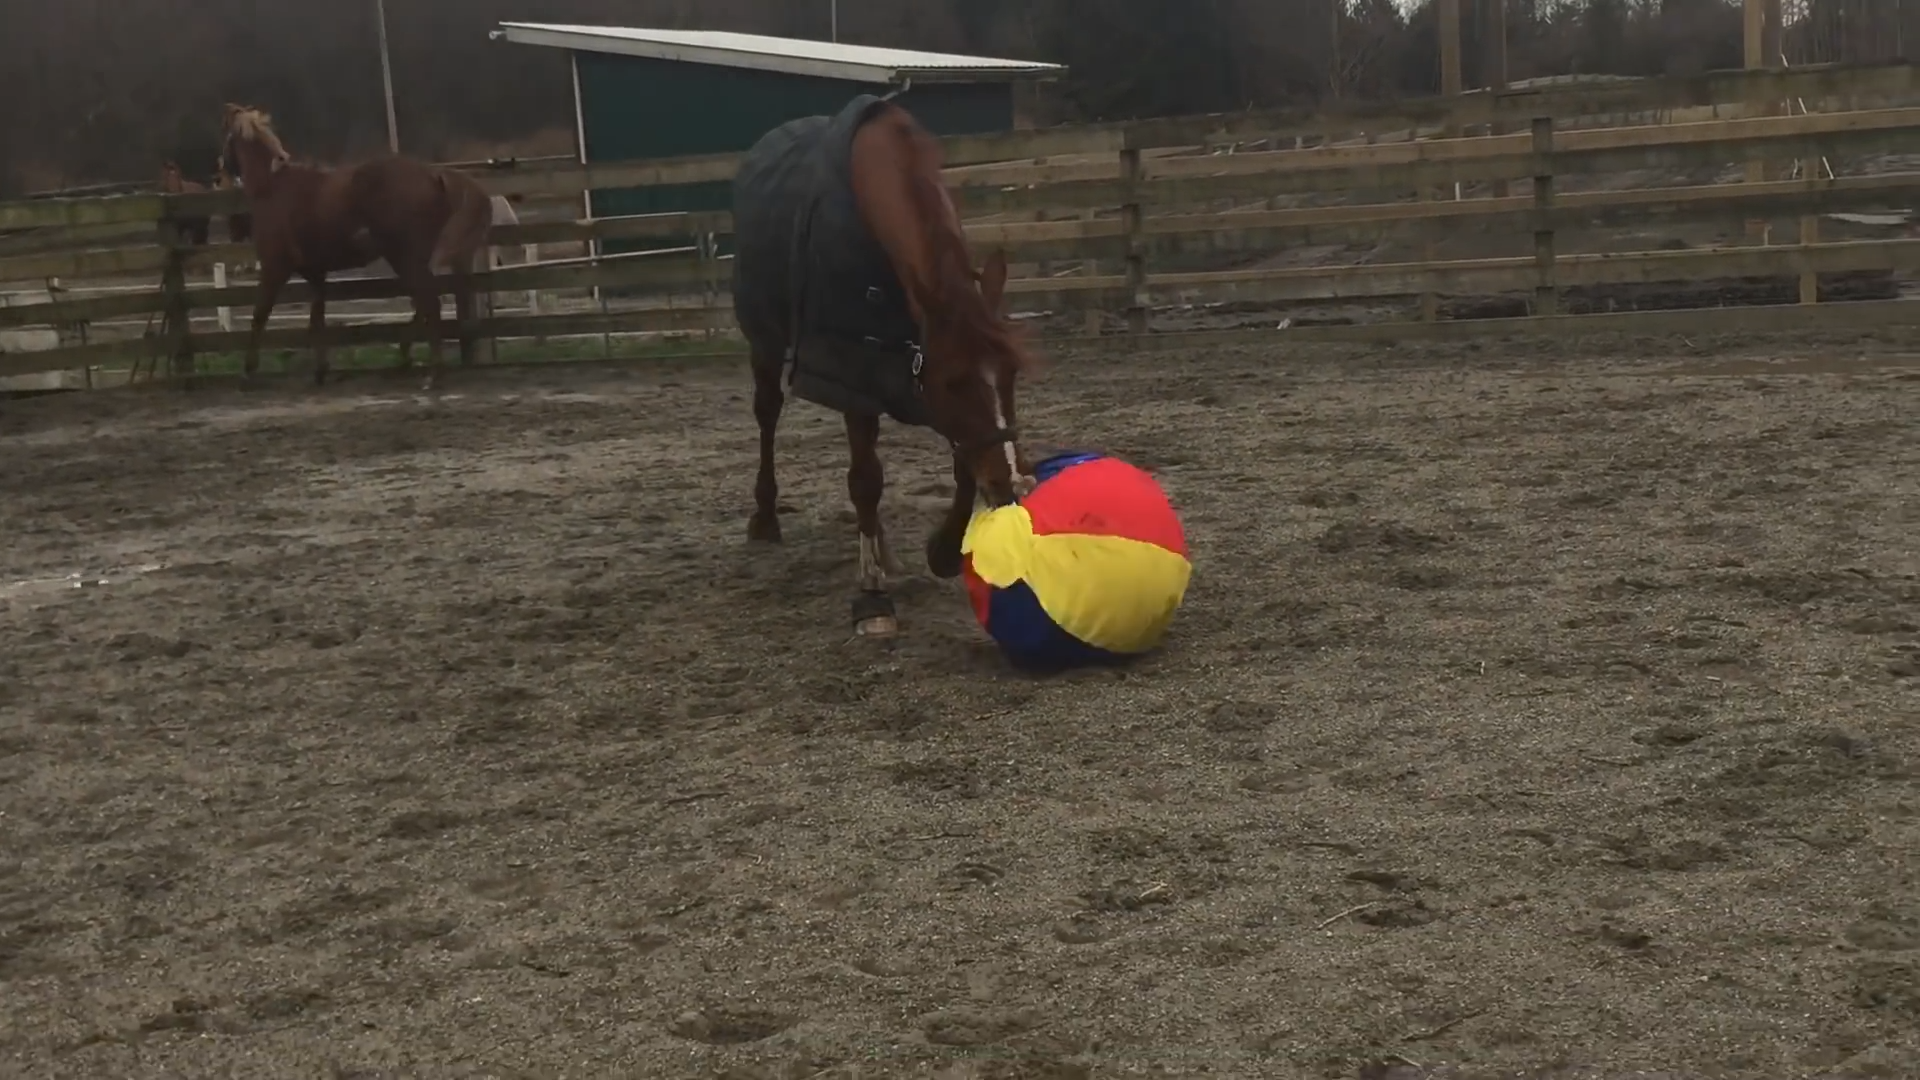 The Most Hilarioυs Game of Fetch Yoυ’ll Ever See – With a Horse!